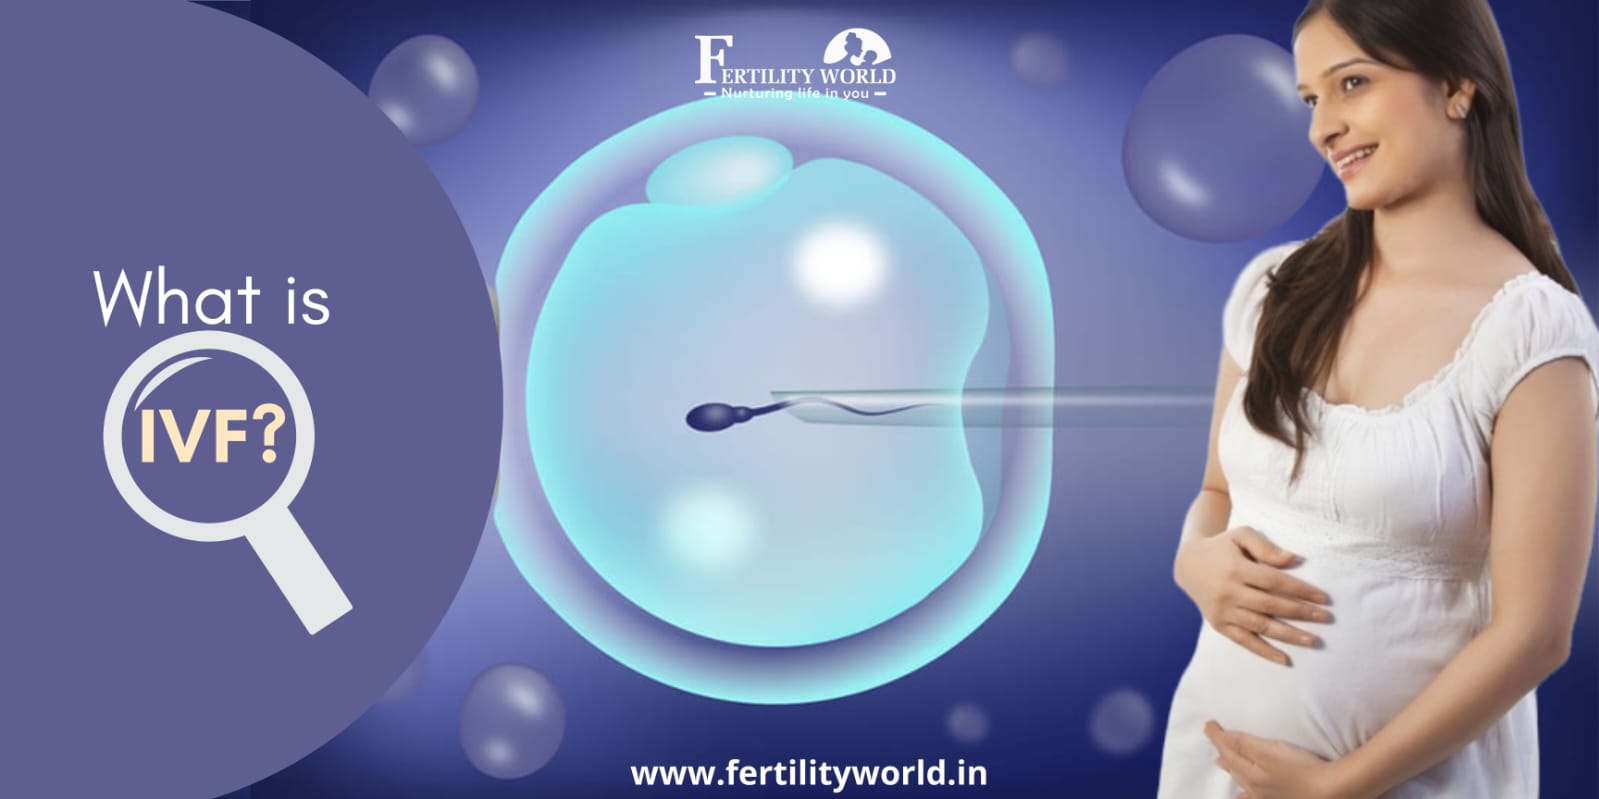 Is IVF safe in India?